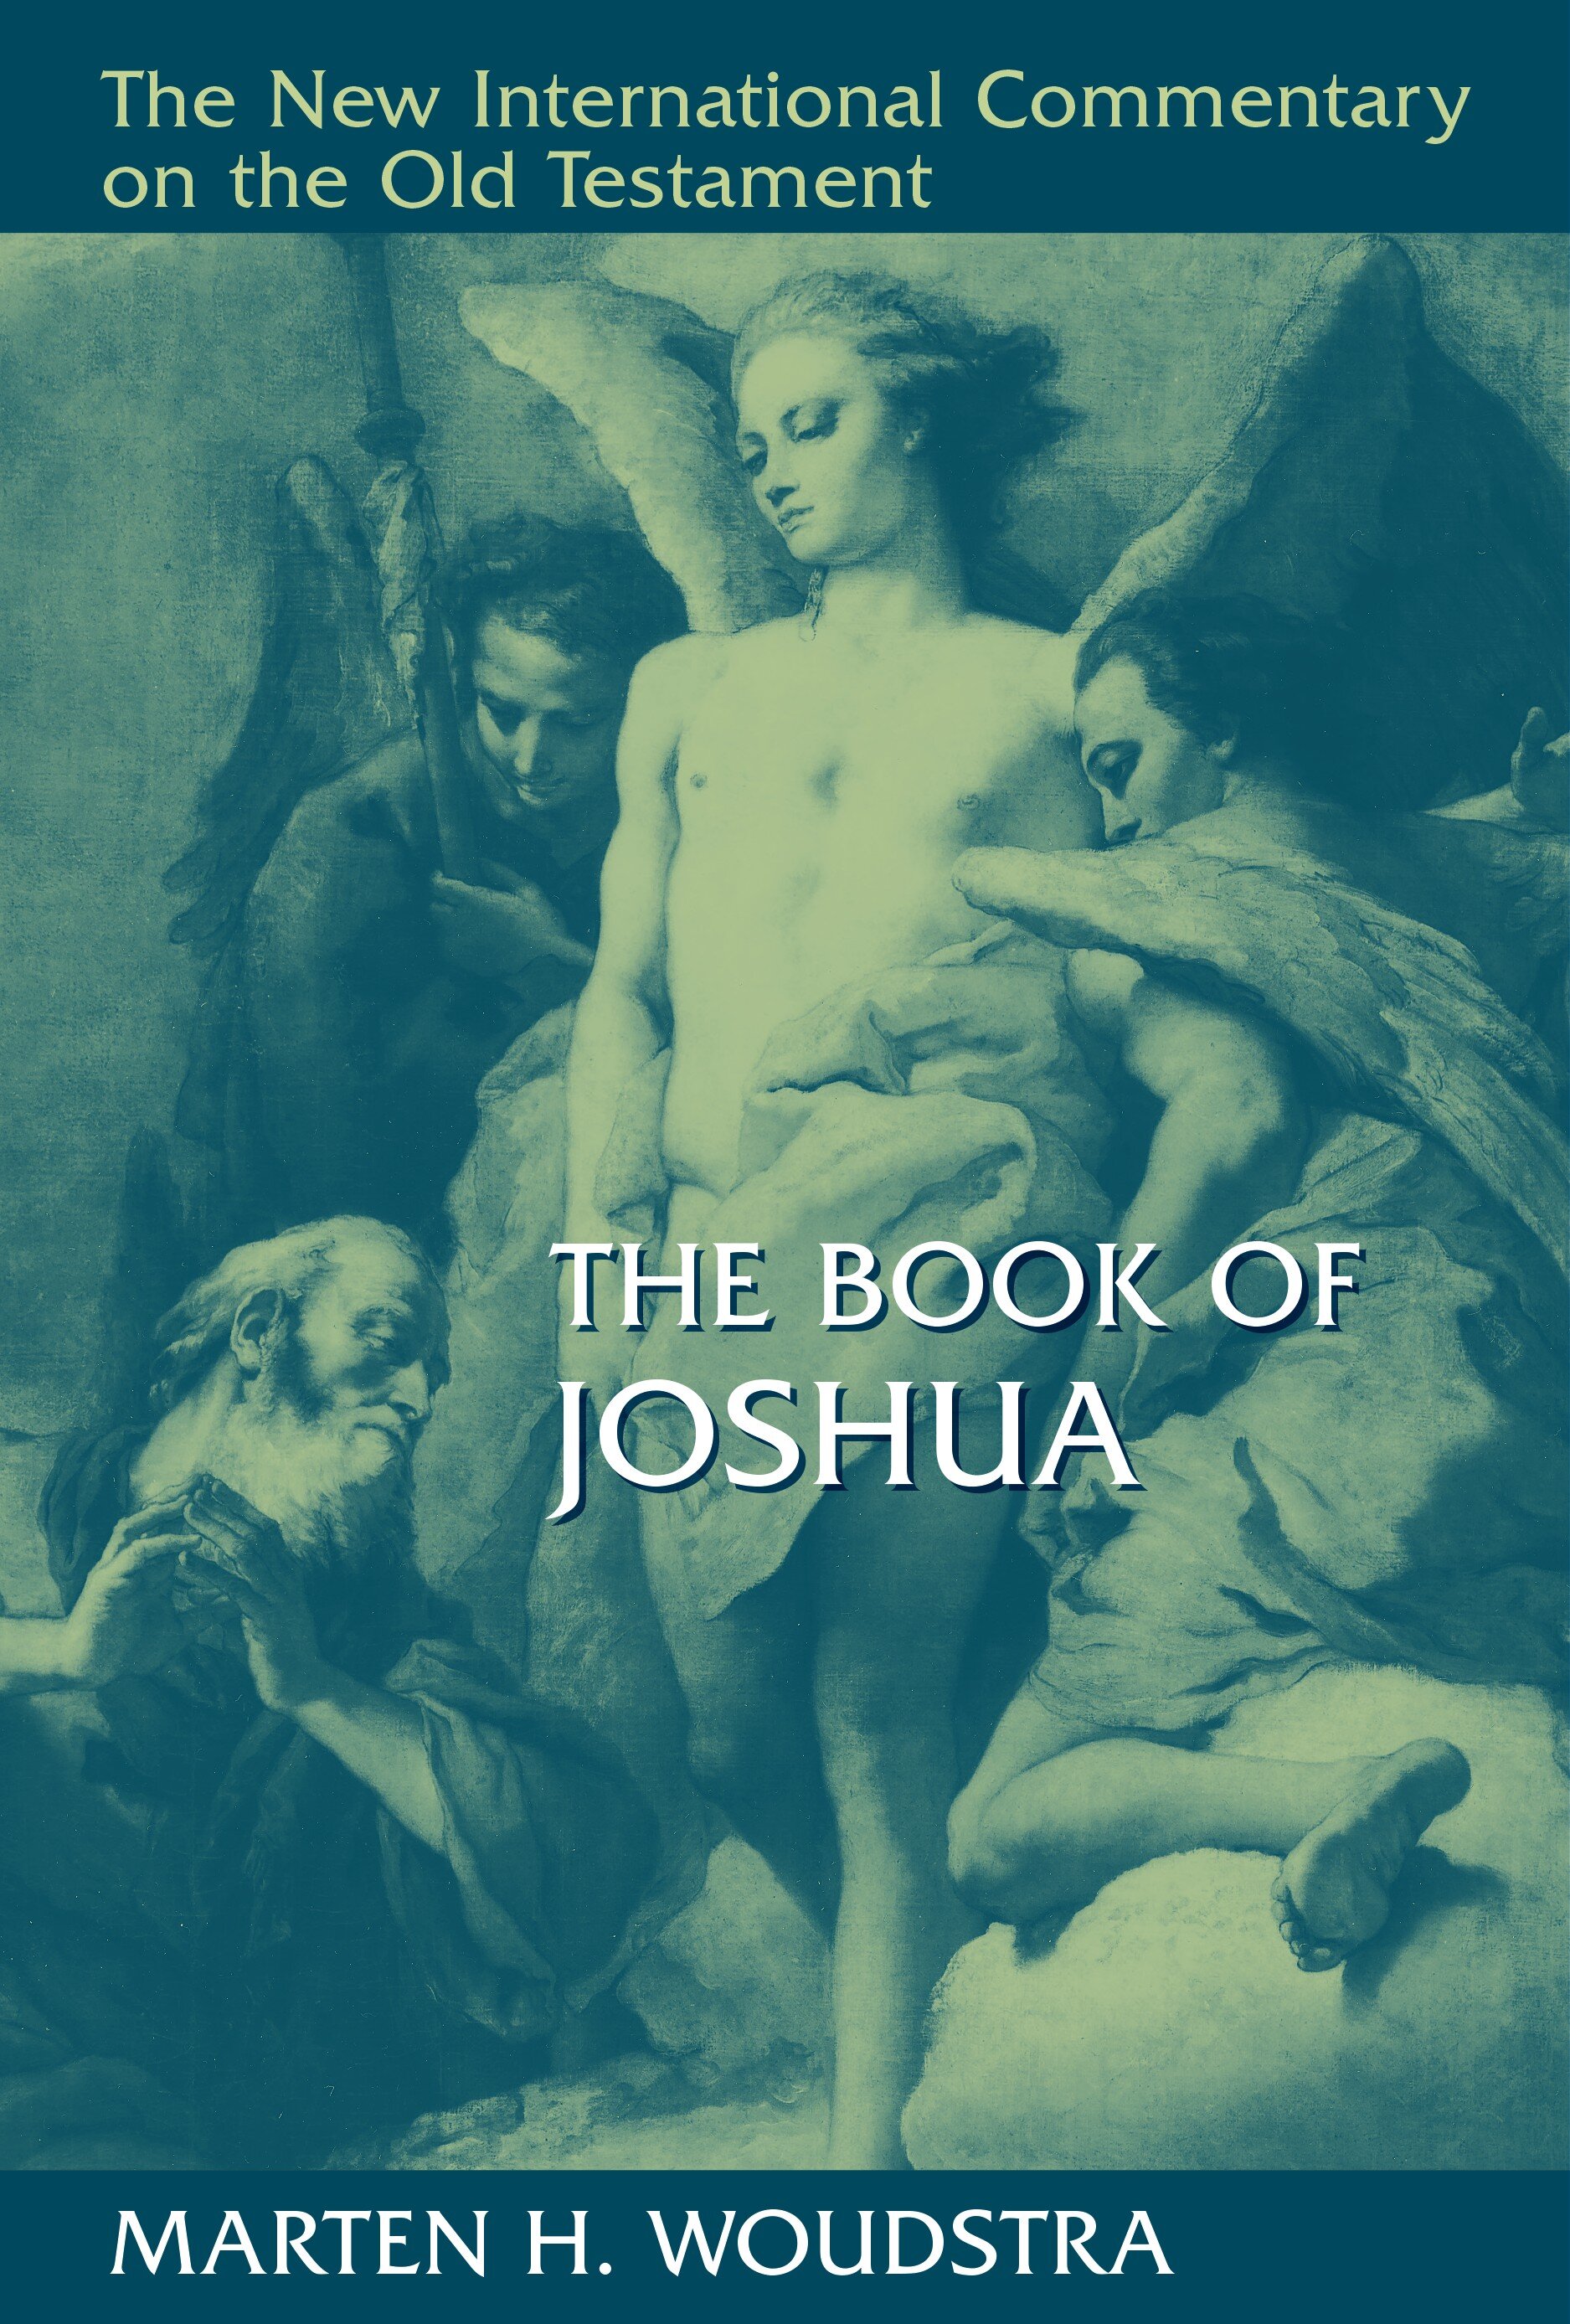 The Book of Joshua (The New International Commentary on the Old Testament | NICOT)